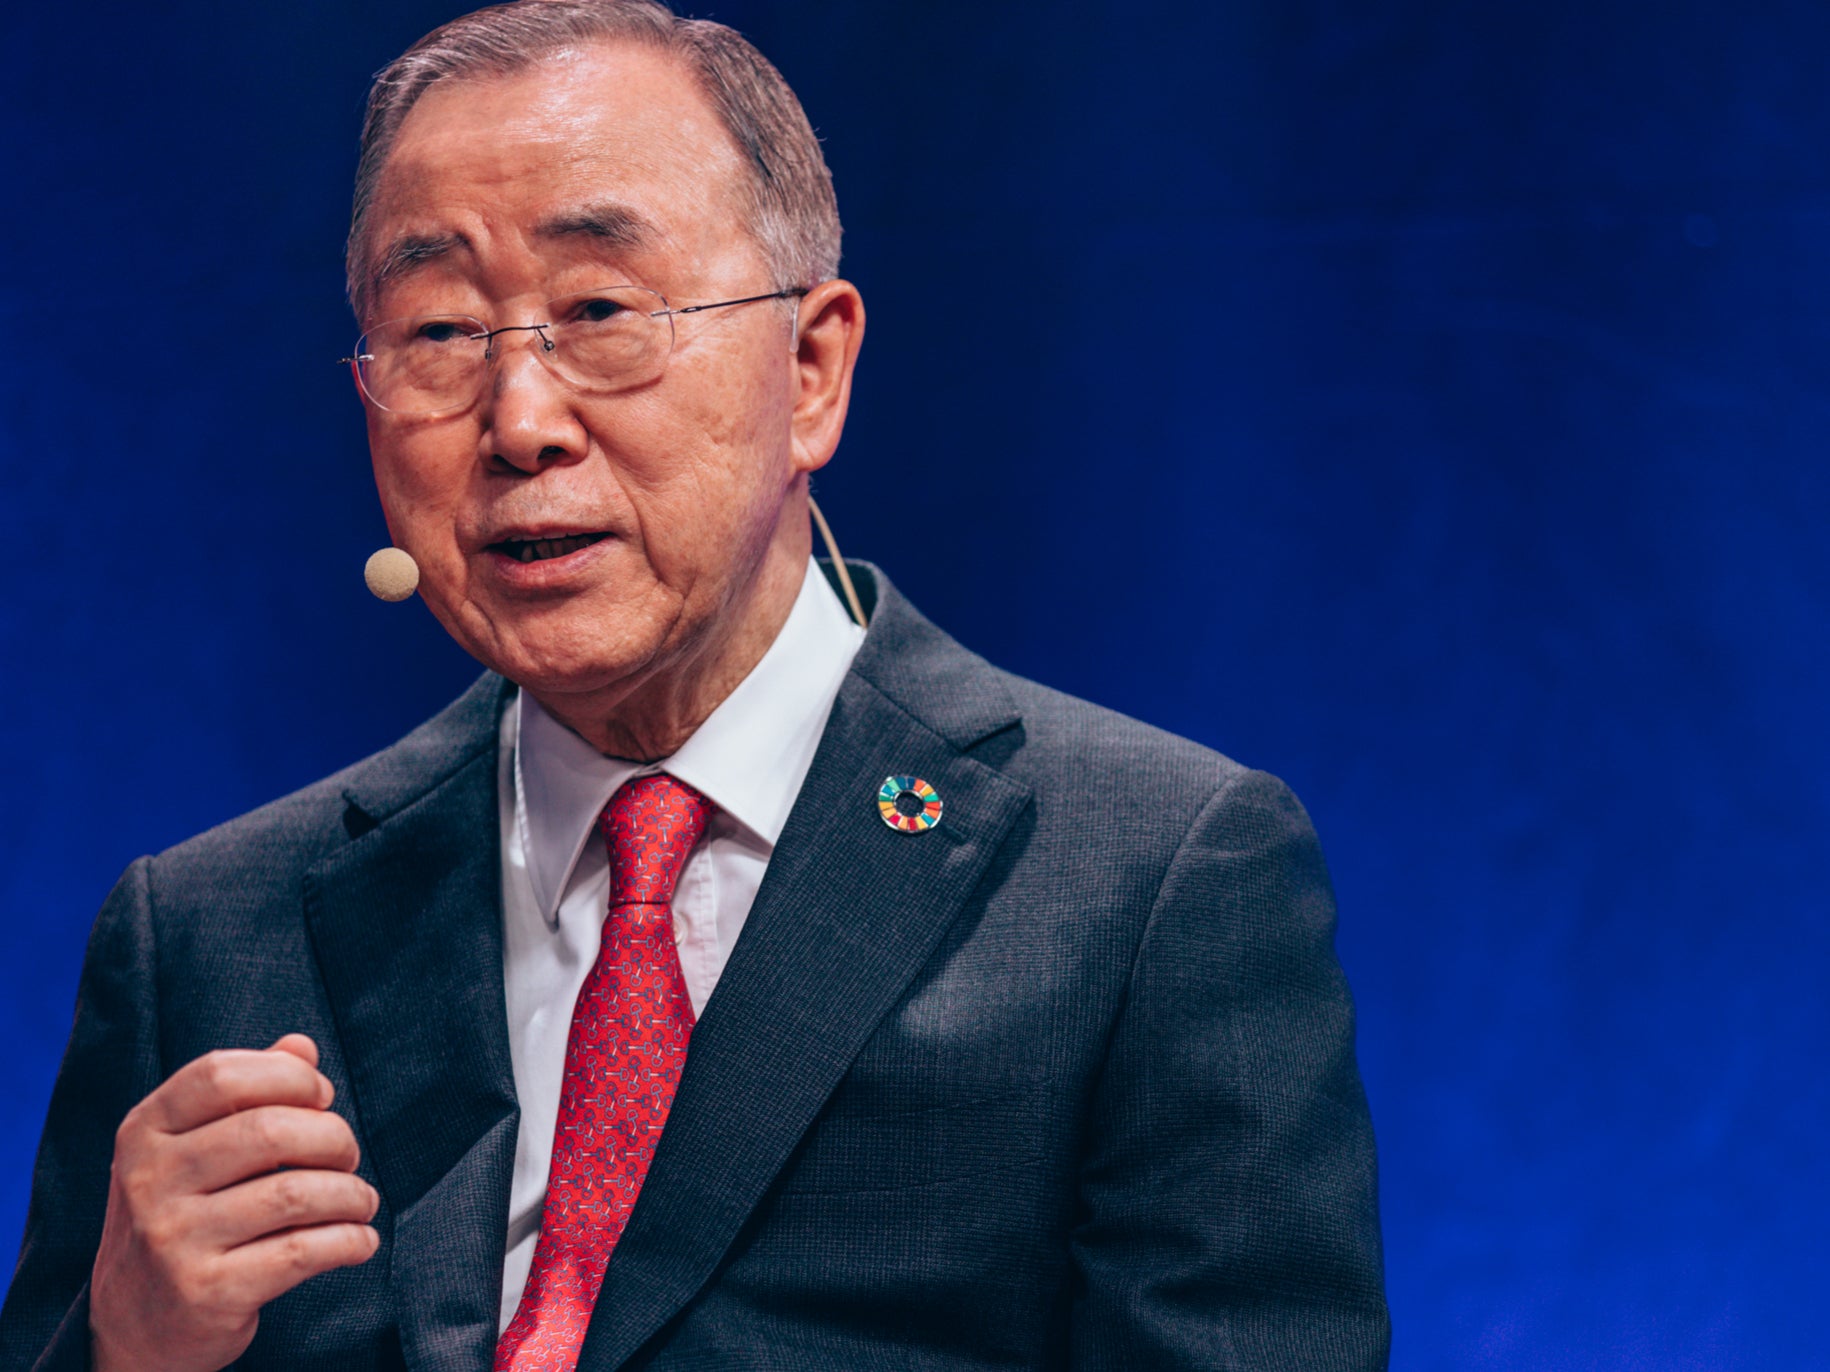 Former secretary general of the United Nations, Ban Ki-moon, speaks at a roundtable event in Vienna with international climate ministers on the issue of adaptation ahead of Cop27